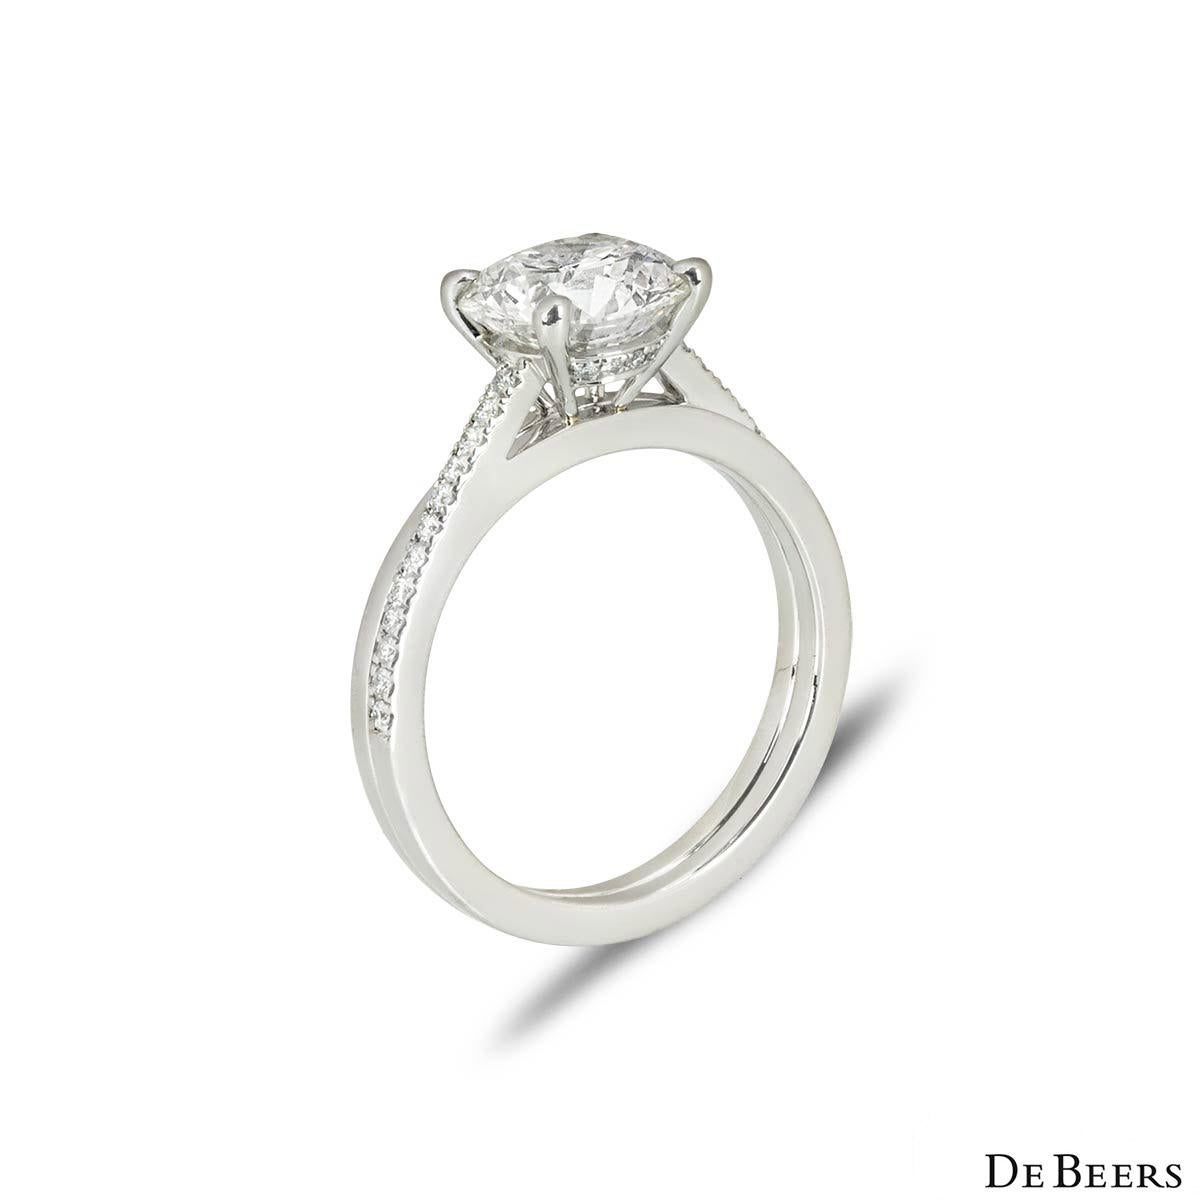 A spectacular platinum diamond engagement ring by De Beers from The Promise collection. Set to the centre in a four-prong mount is a round brilliant cut diamond weighing 2.05ct, I colour and SI2 clarity. The diamond scores an excellent rating in all